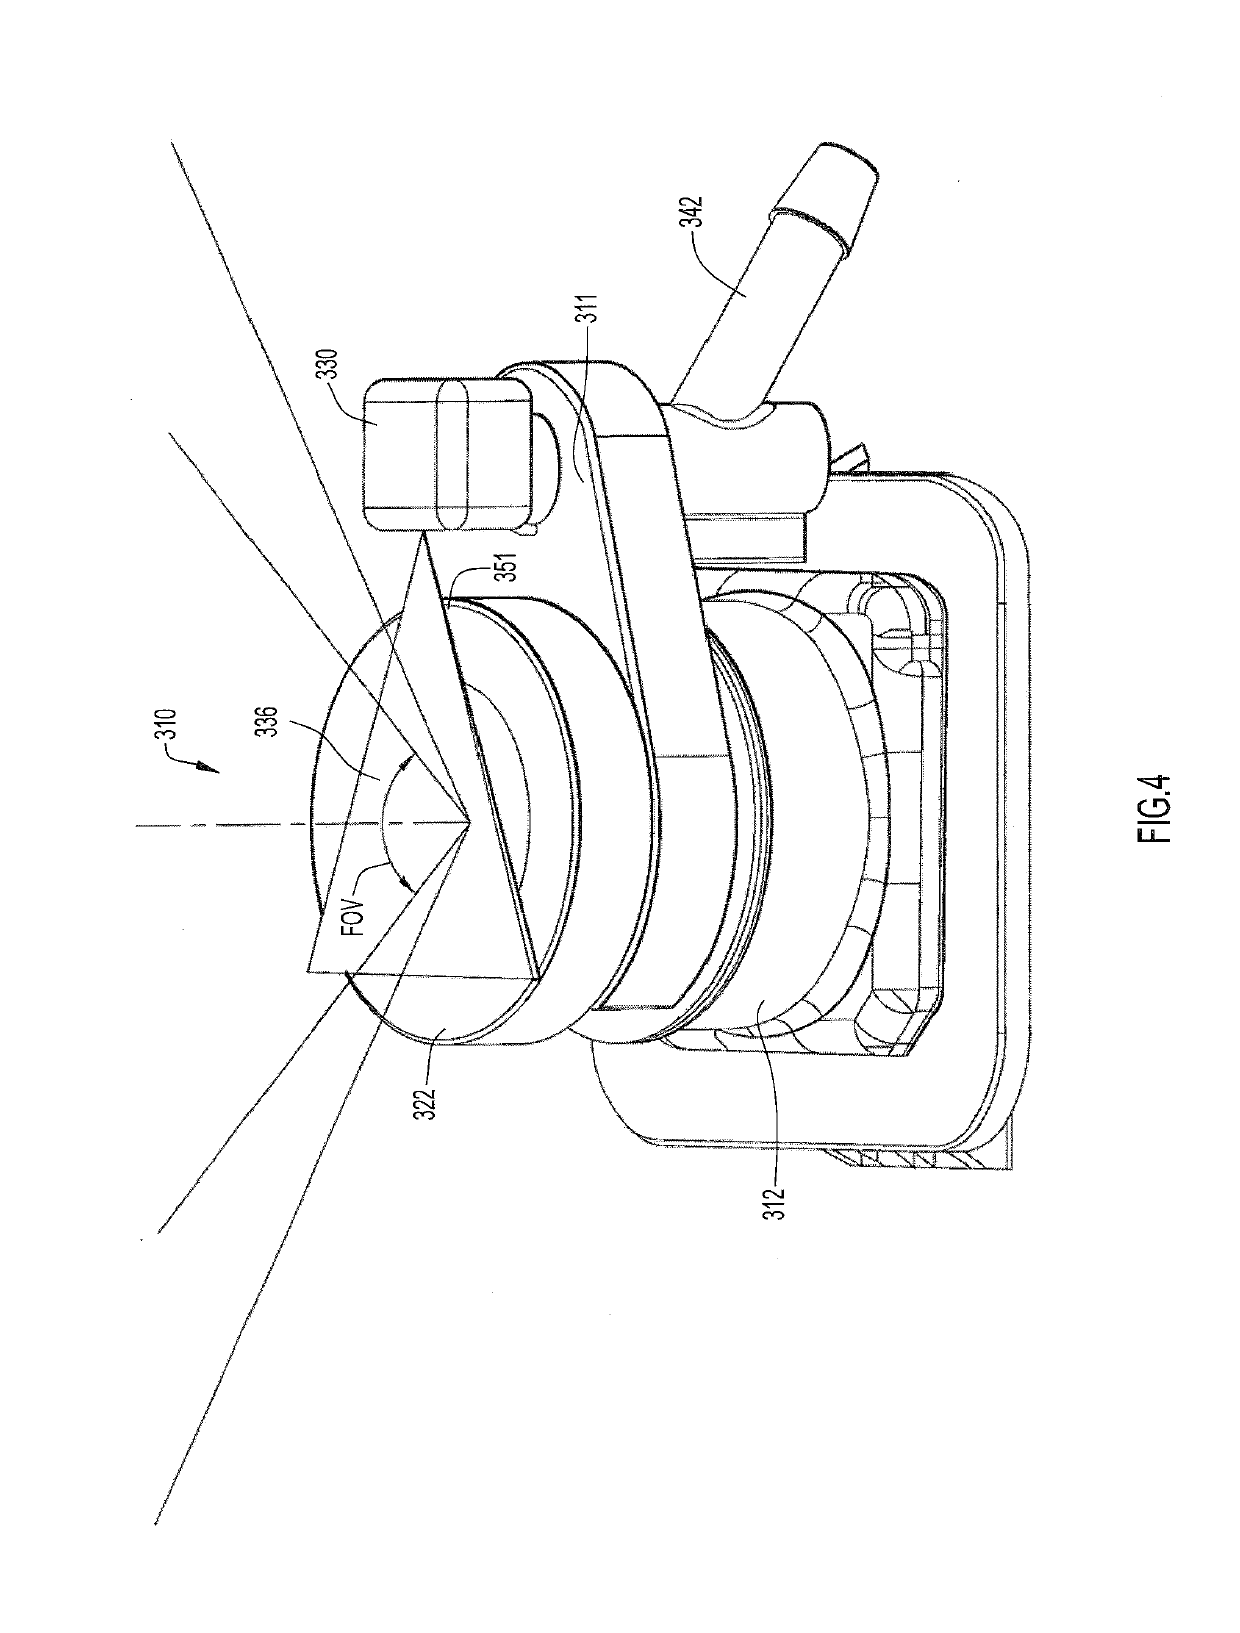 Self-contained camera wash system and method